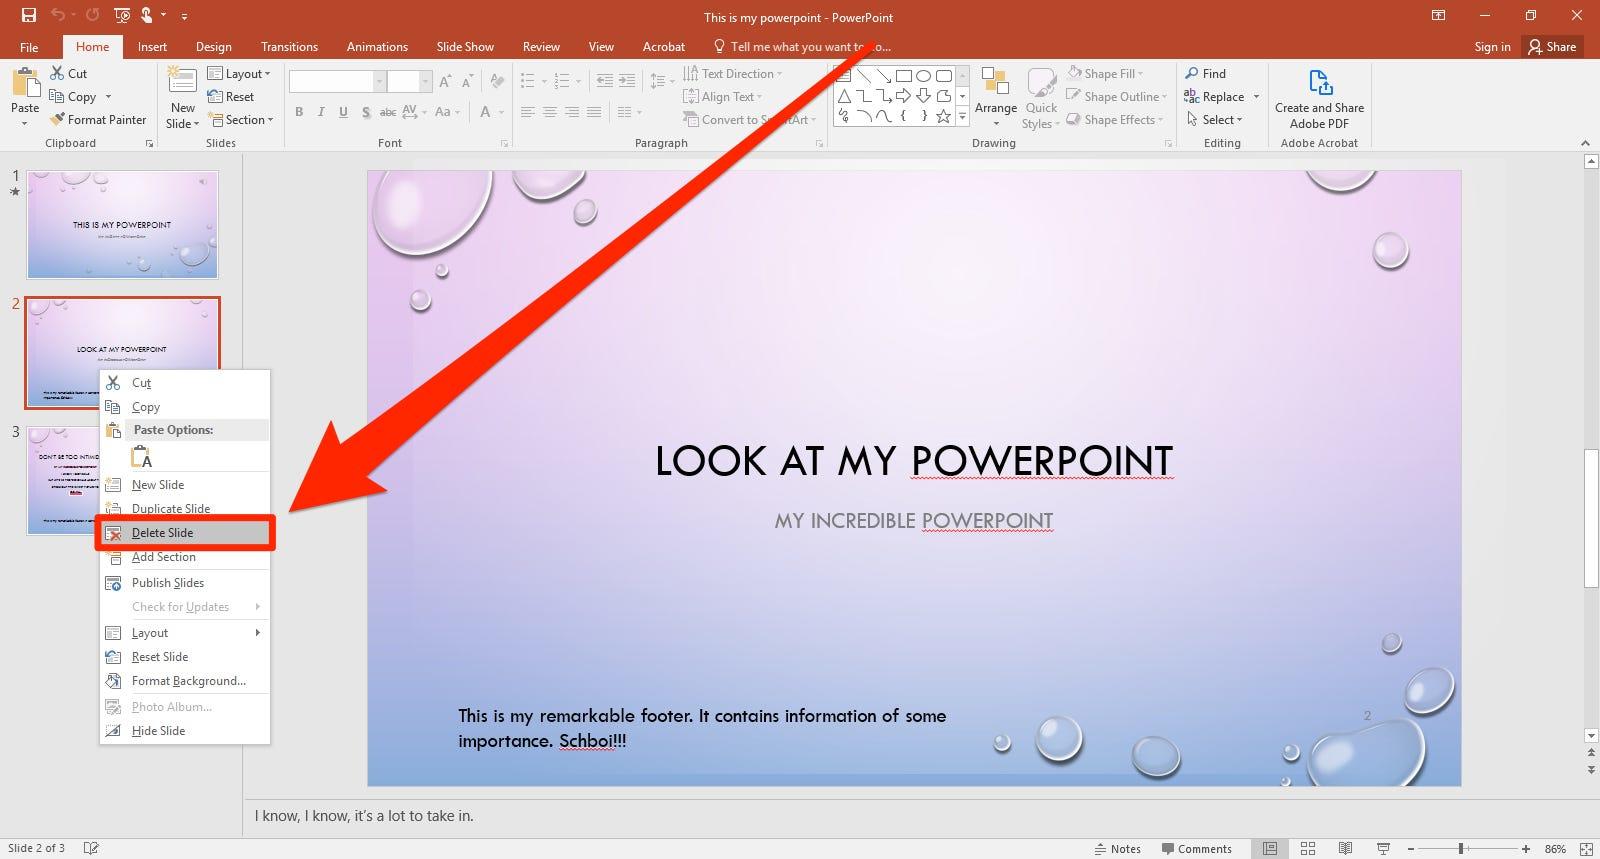 how to remove a slide from powerpoint presentation